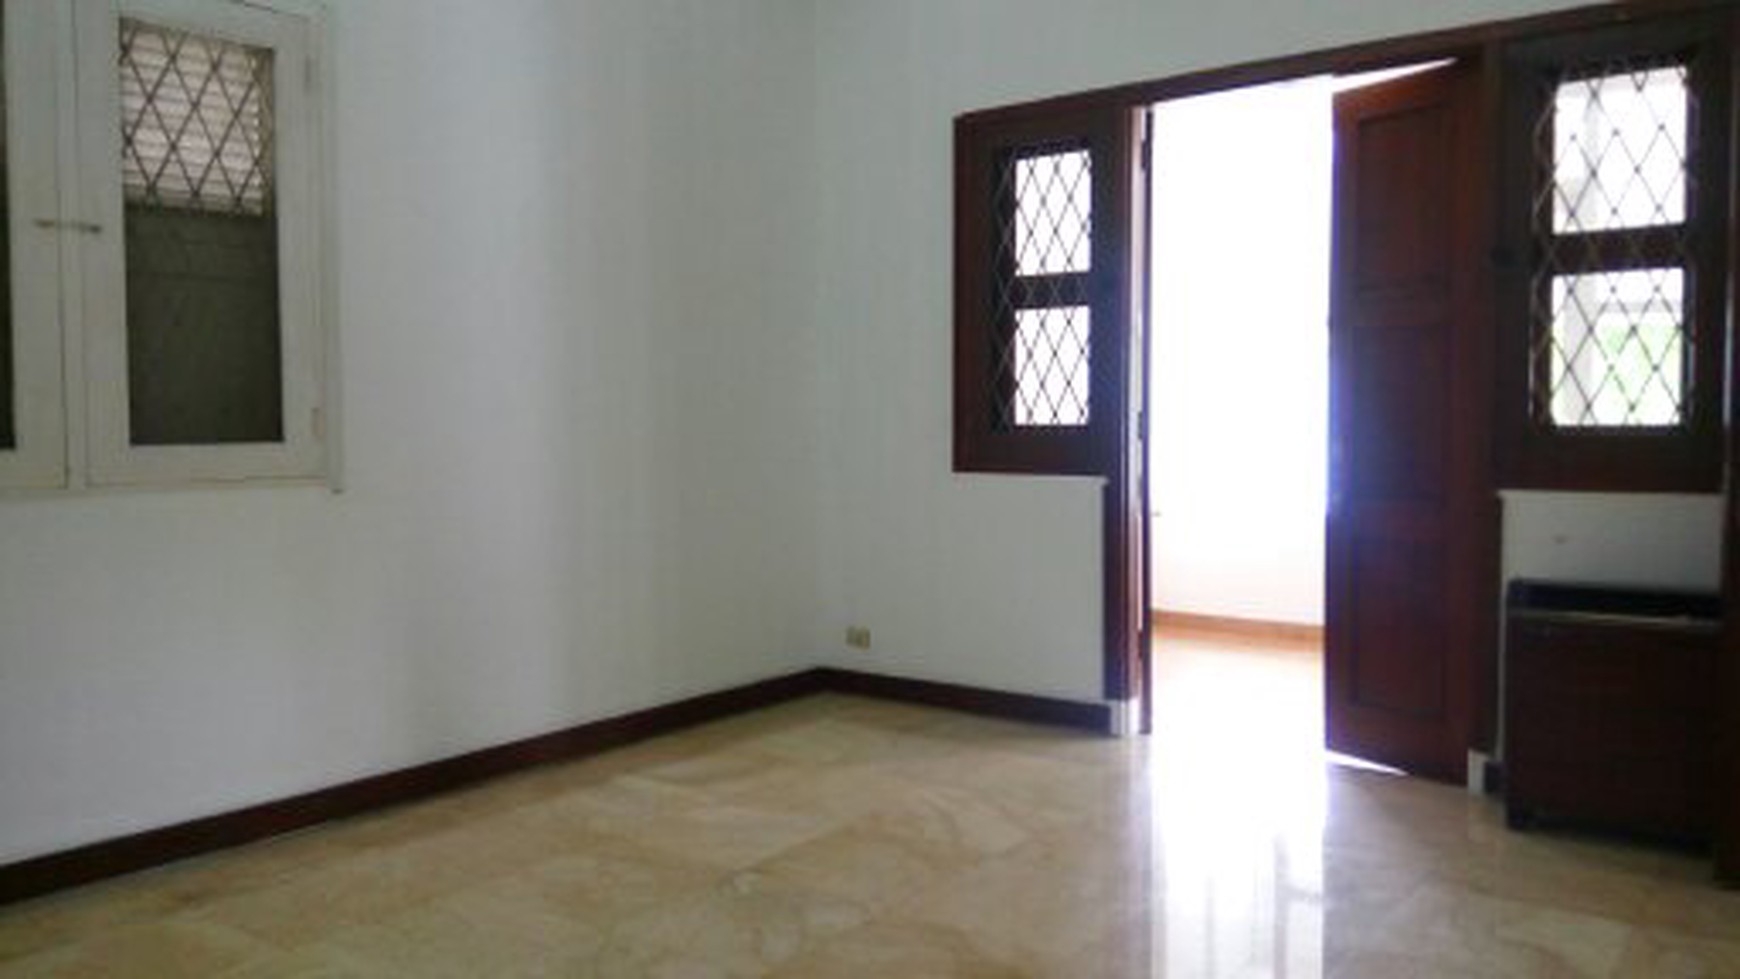 Comfortable, safety area and suitable for embassy, expatriat and others " The Price Can Be Negotiable "